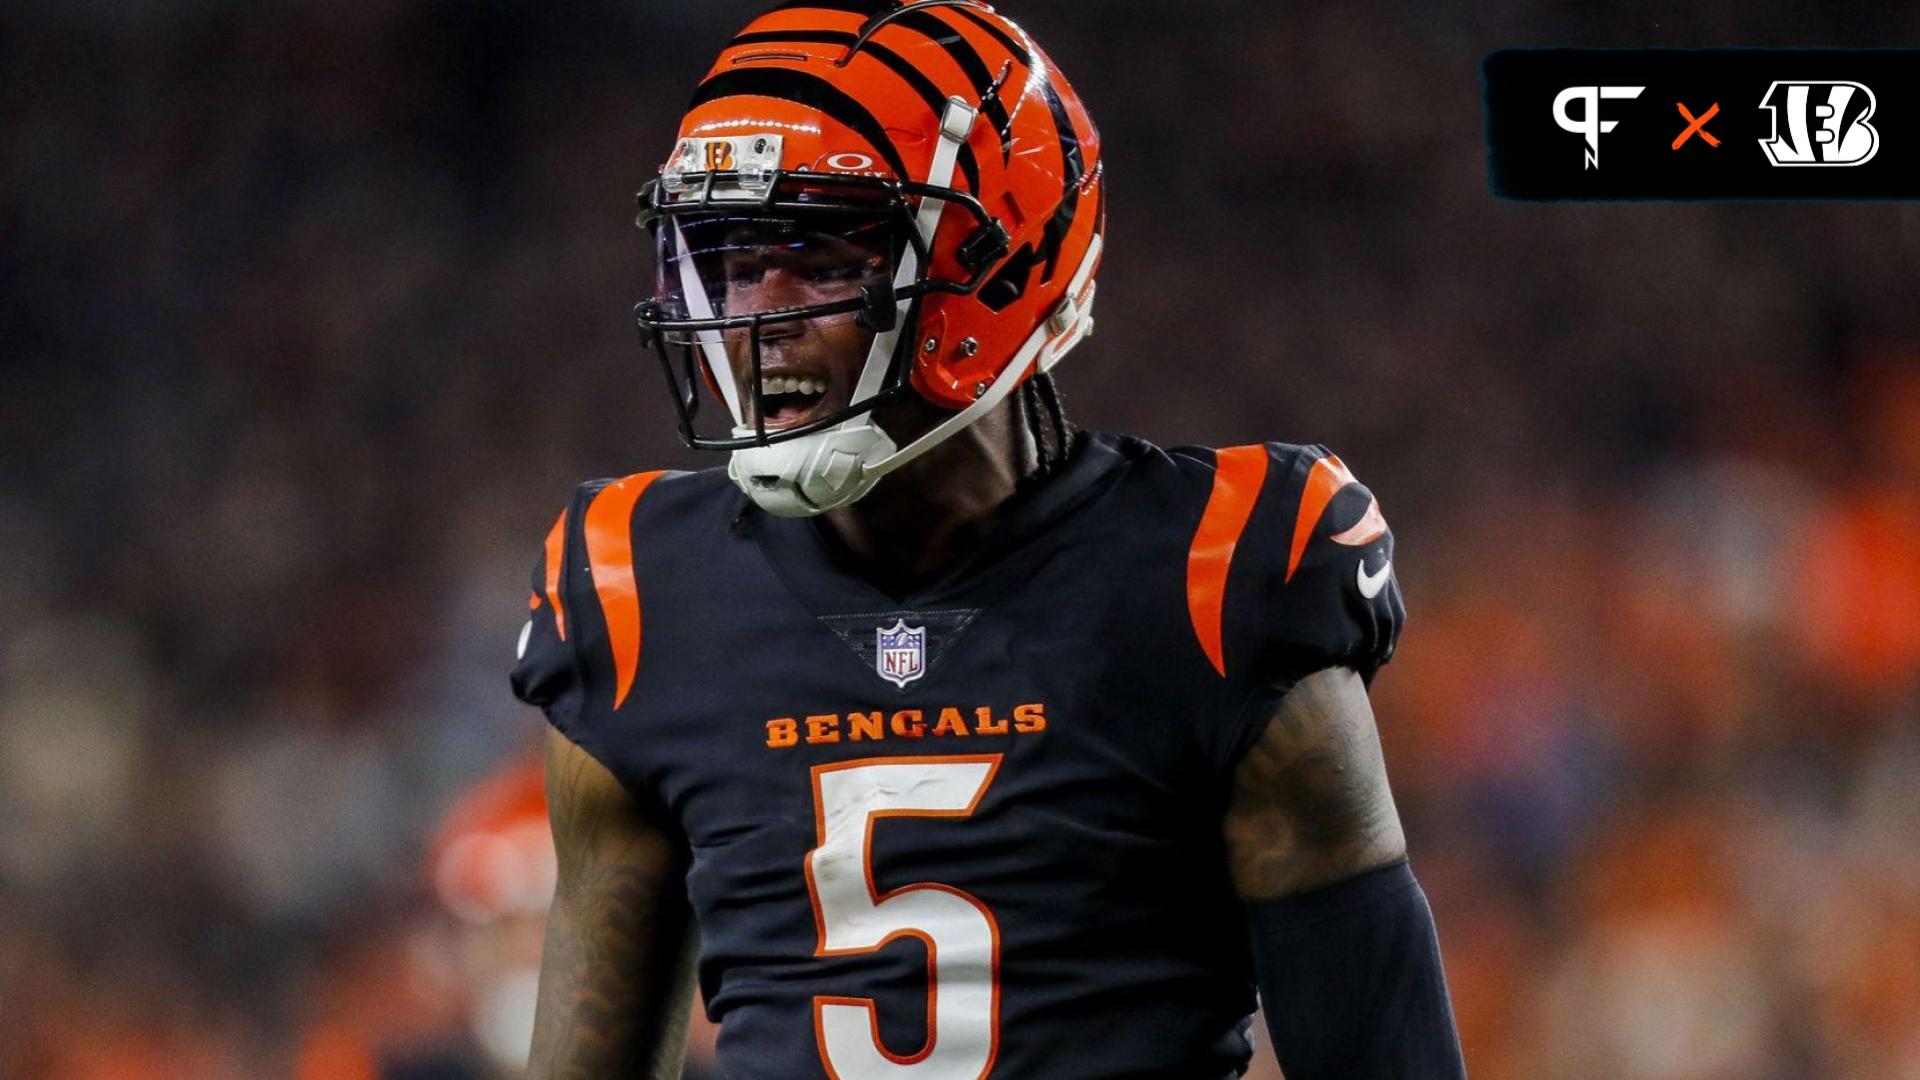 Cincinnati Bengals wide receiver Tee Higgins (5) reacts after advancing the ball against the Buffalo Bills in the second half at Paycor Stadium.